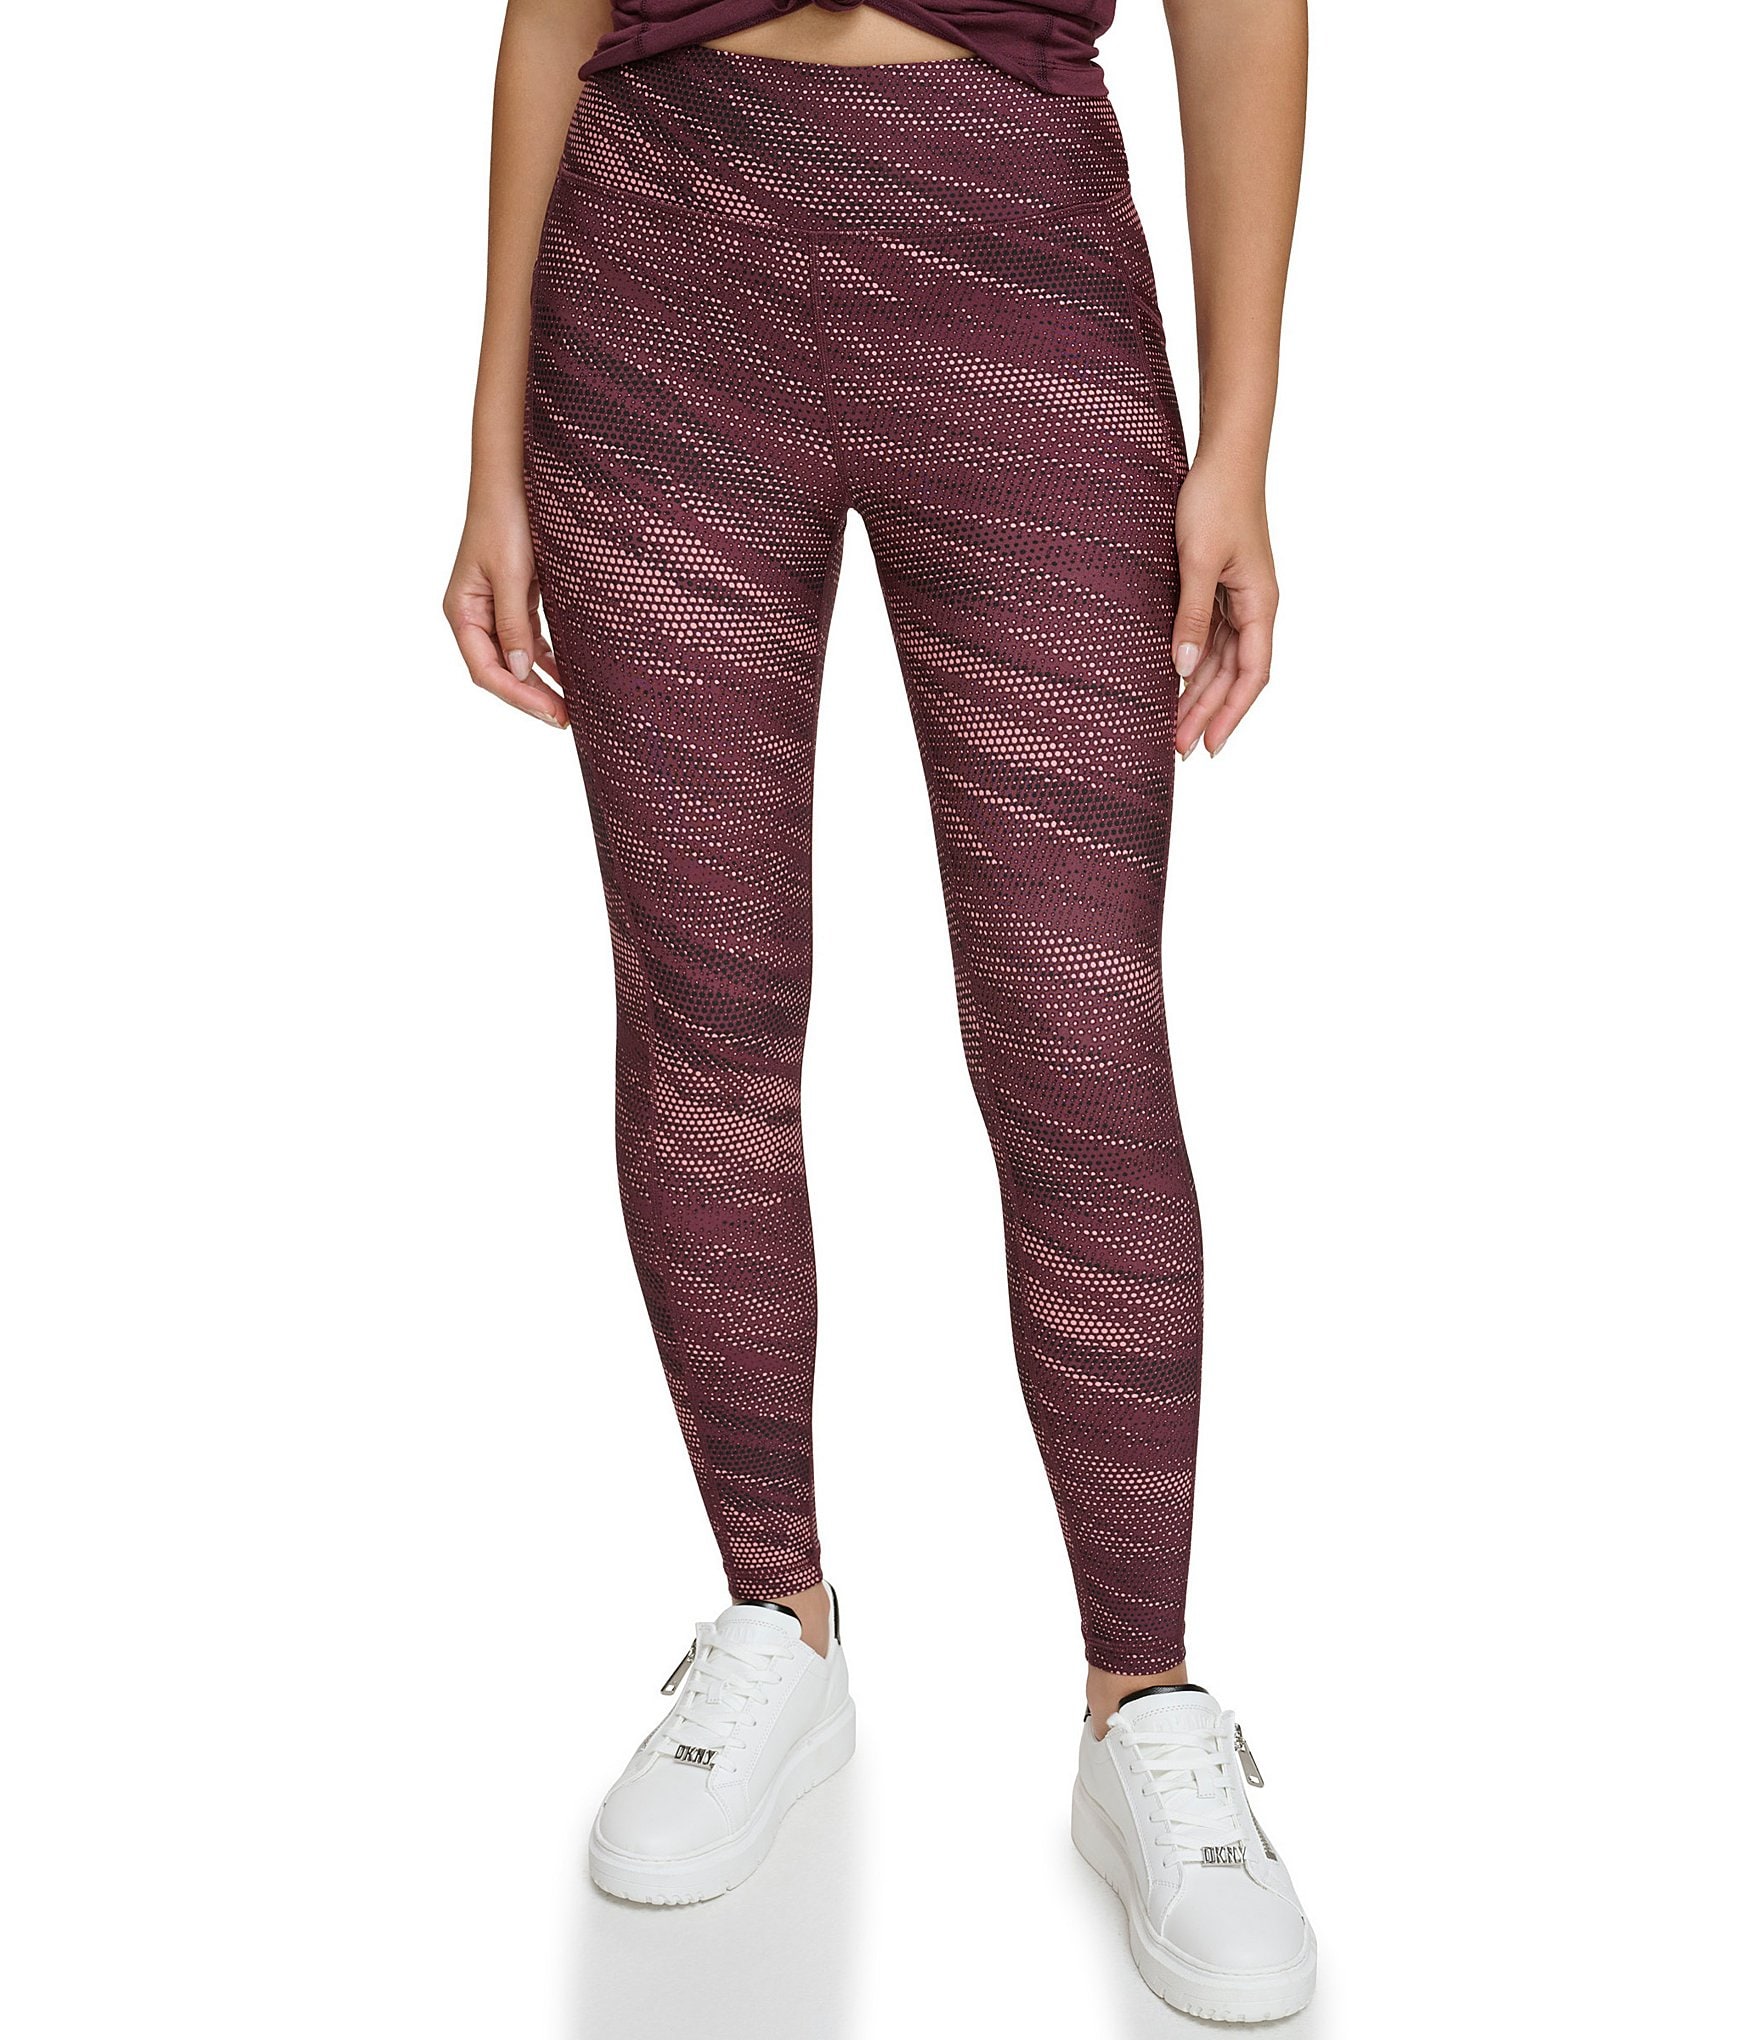 70% OFF - Infinity Strapped Leggings (Limited Quantity) – Ultimate